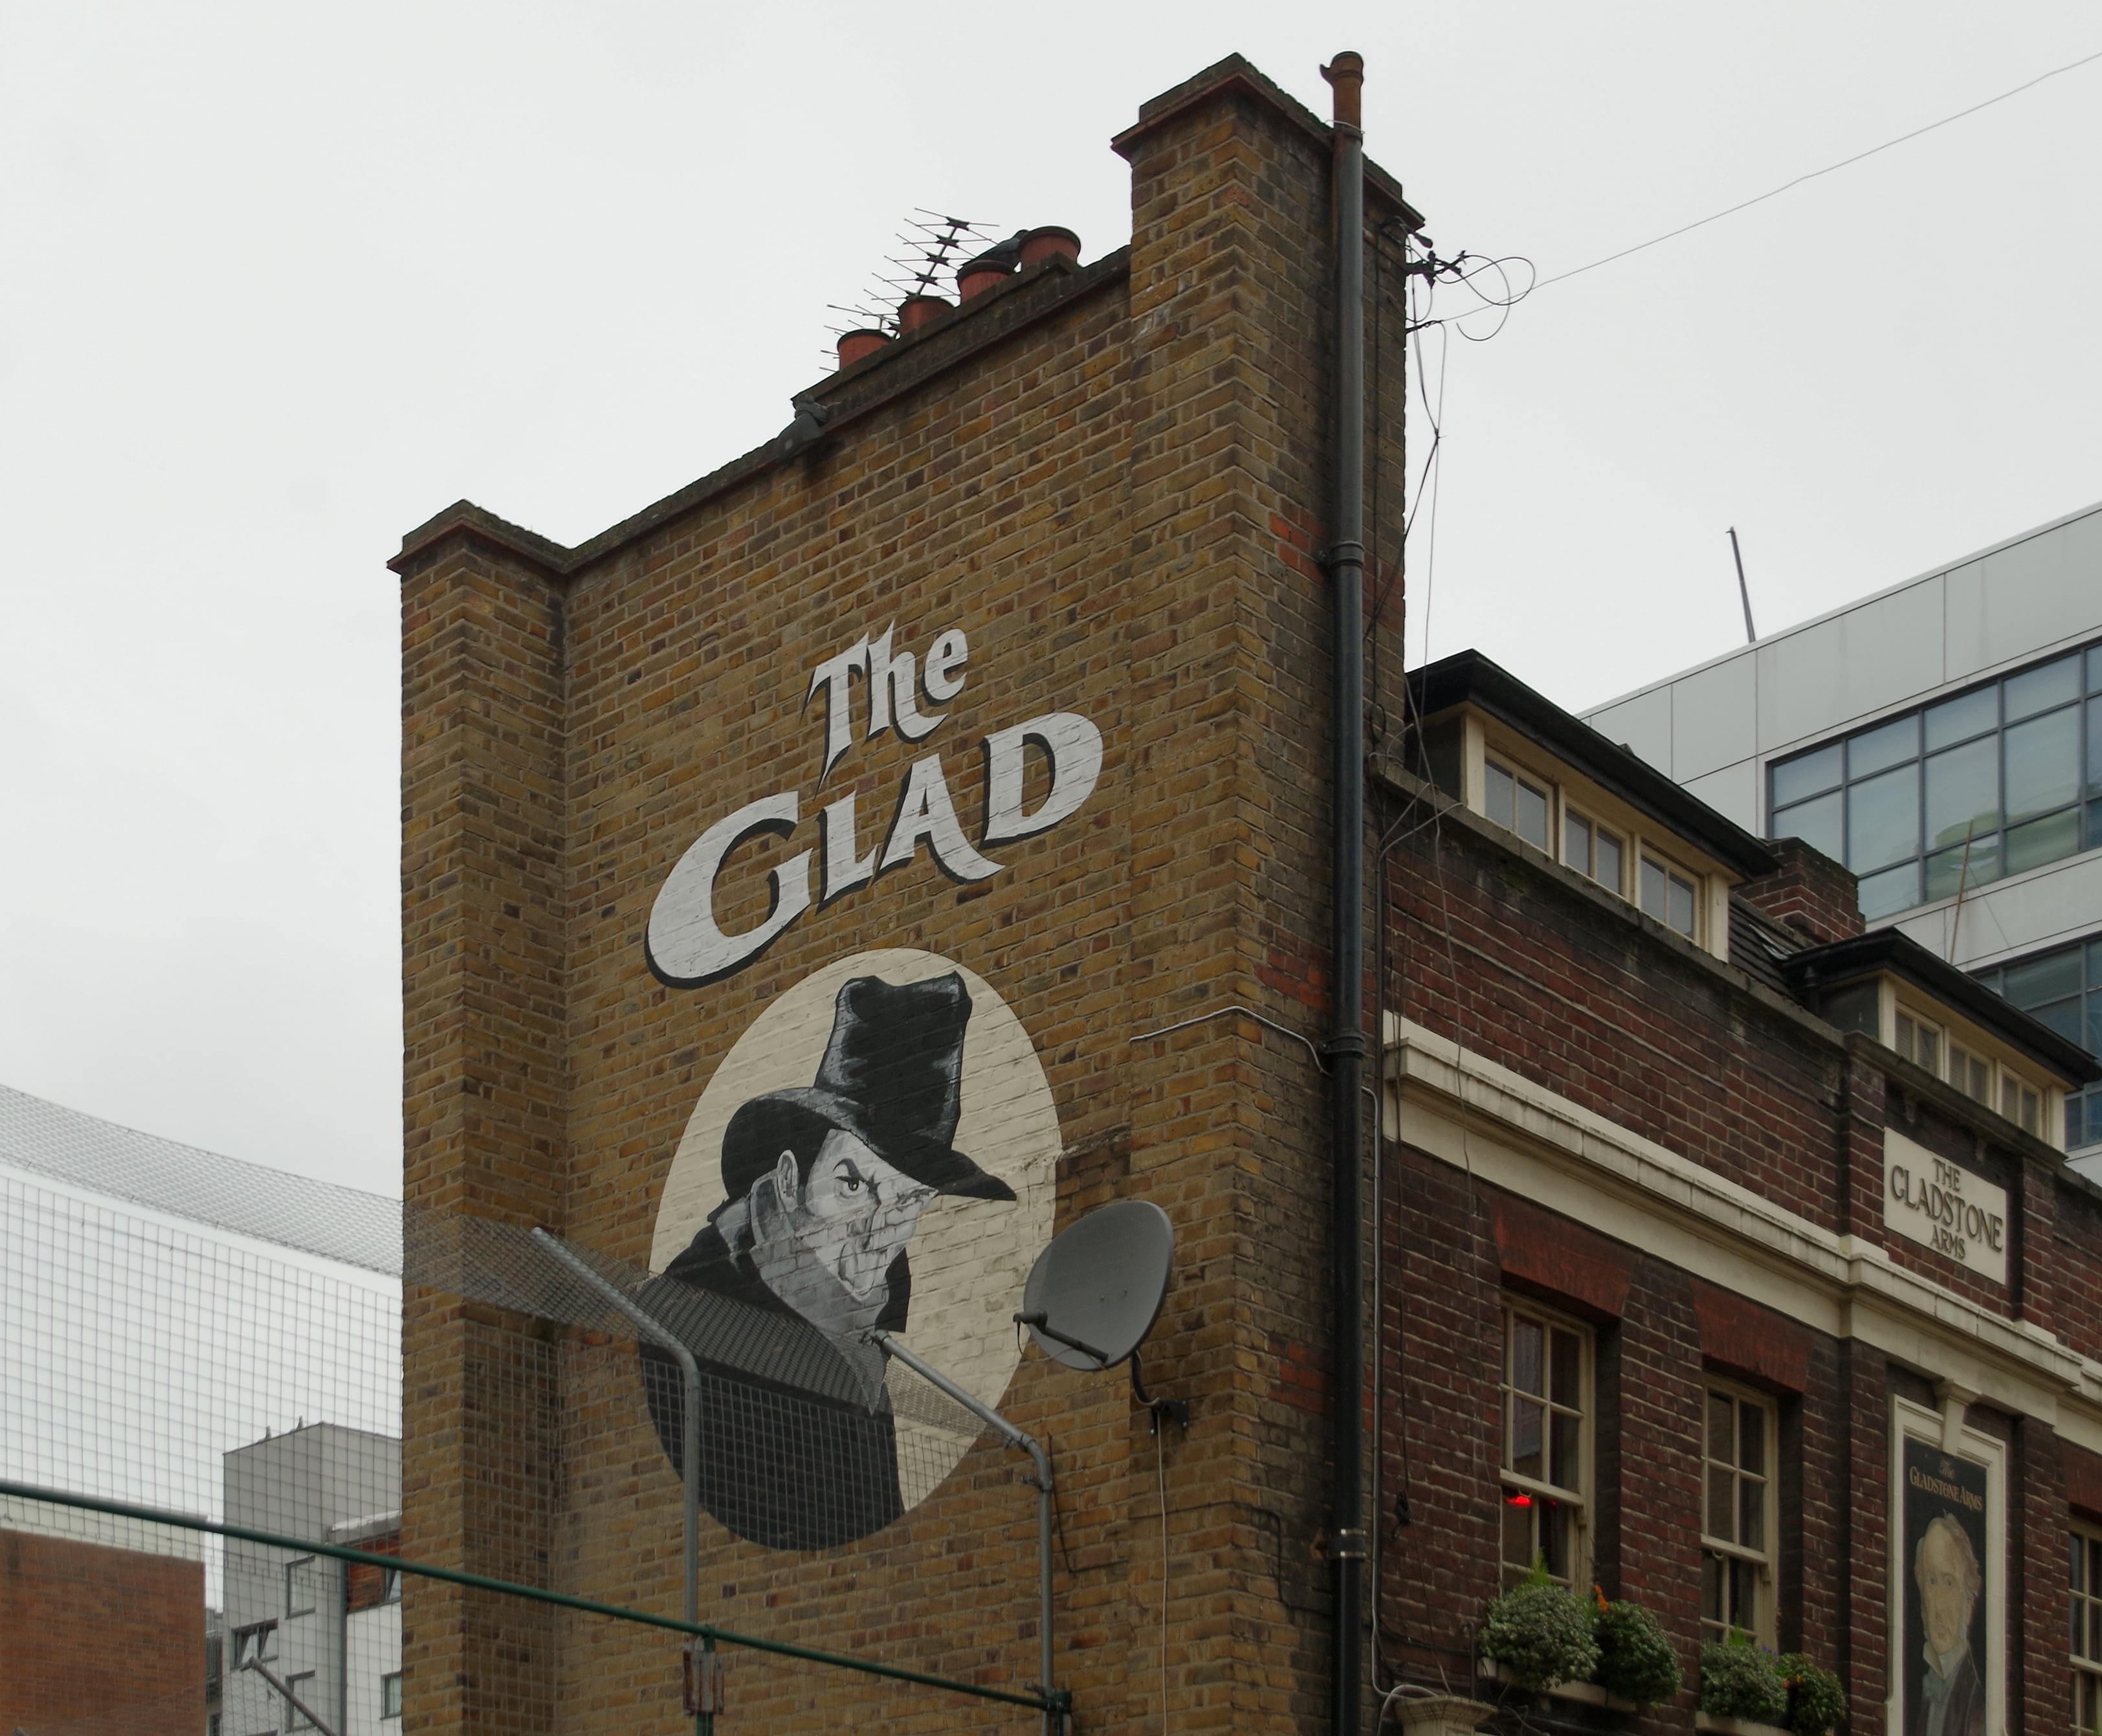 For an authentic British ale, the "Glad" is an excellent place to visit in London